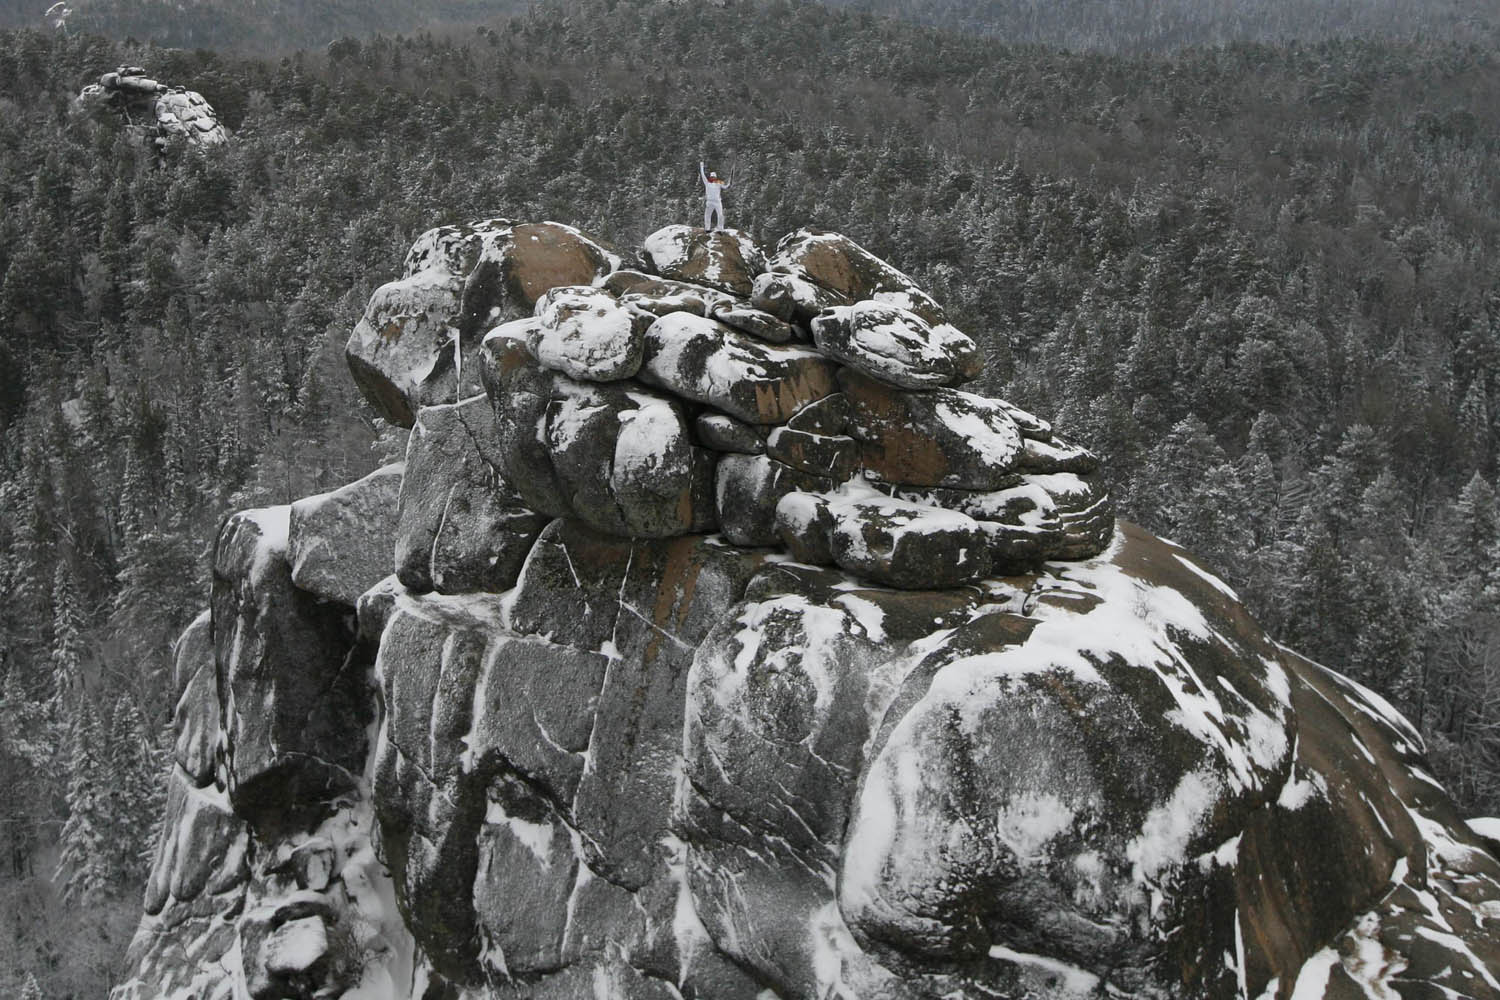 Nov. 26, 2013. Russian alpinist Vladimir Gunko stands at the top of the rock named  The First Stolb  (the First Pillar) at the Stolby national nature reserve during the Sochi 2014 Winter Olympic torch relay in the Siberian Taiga area outside Krasnoyarsk.